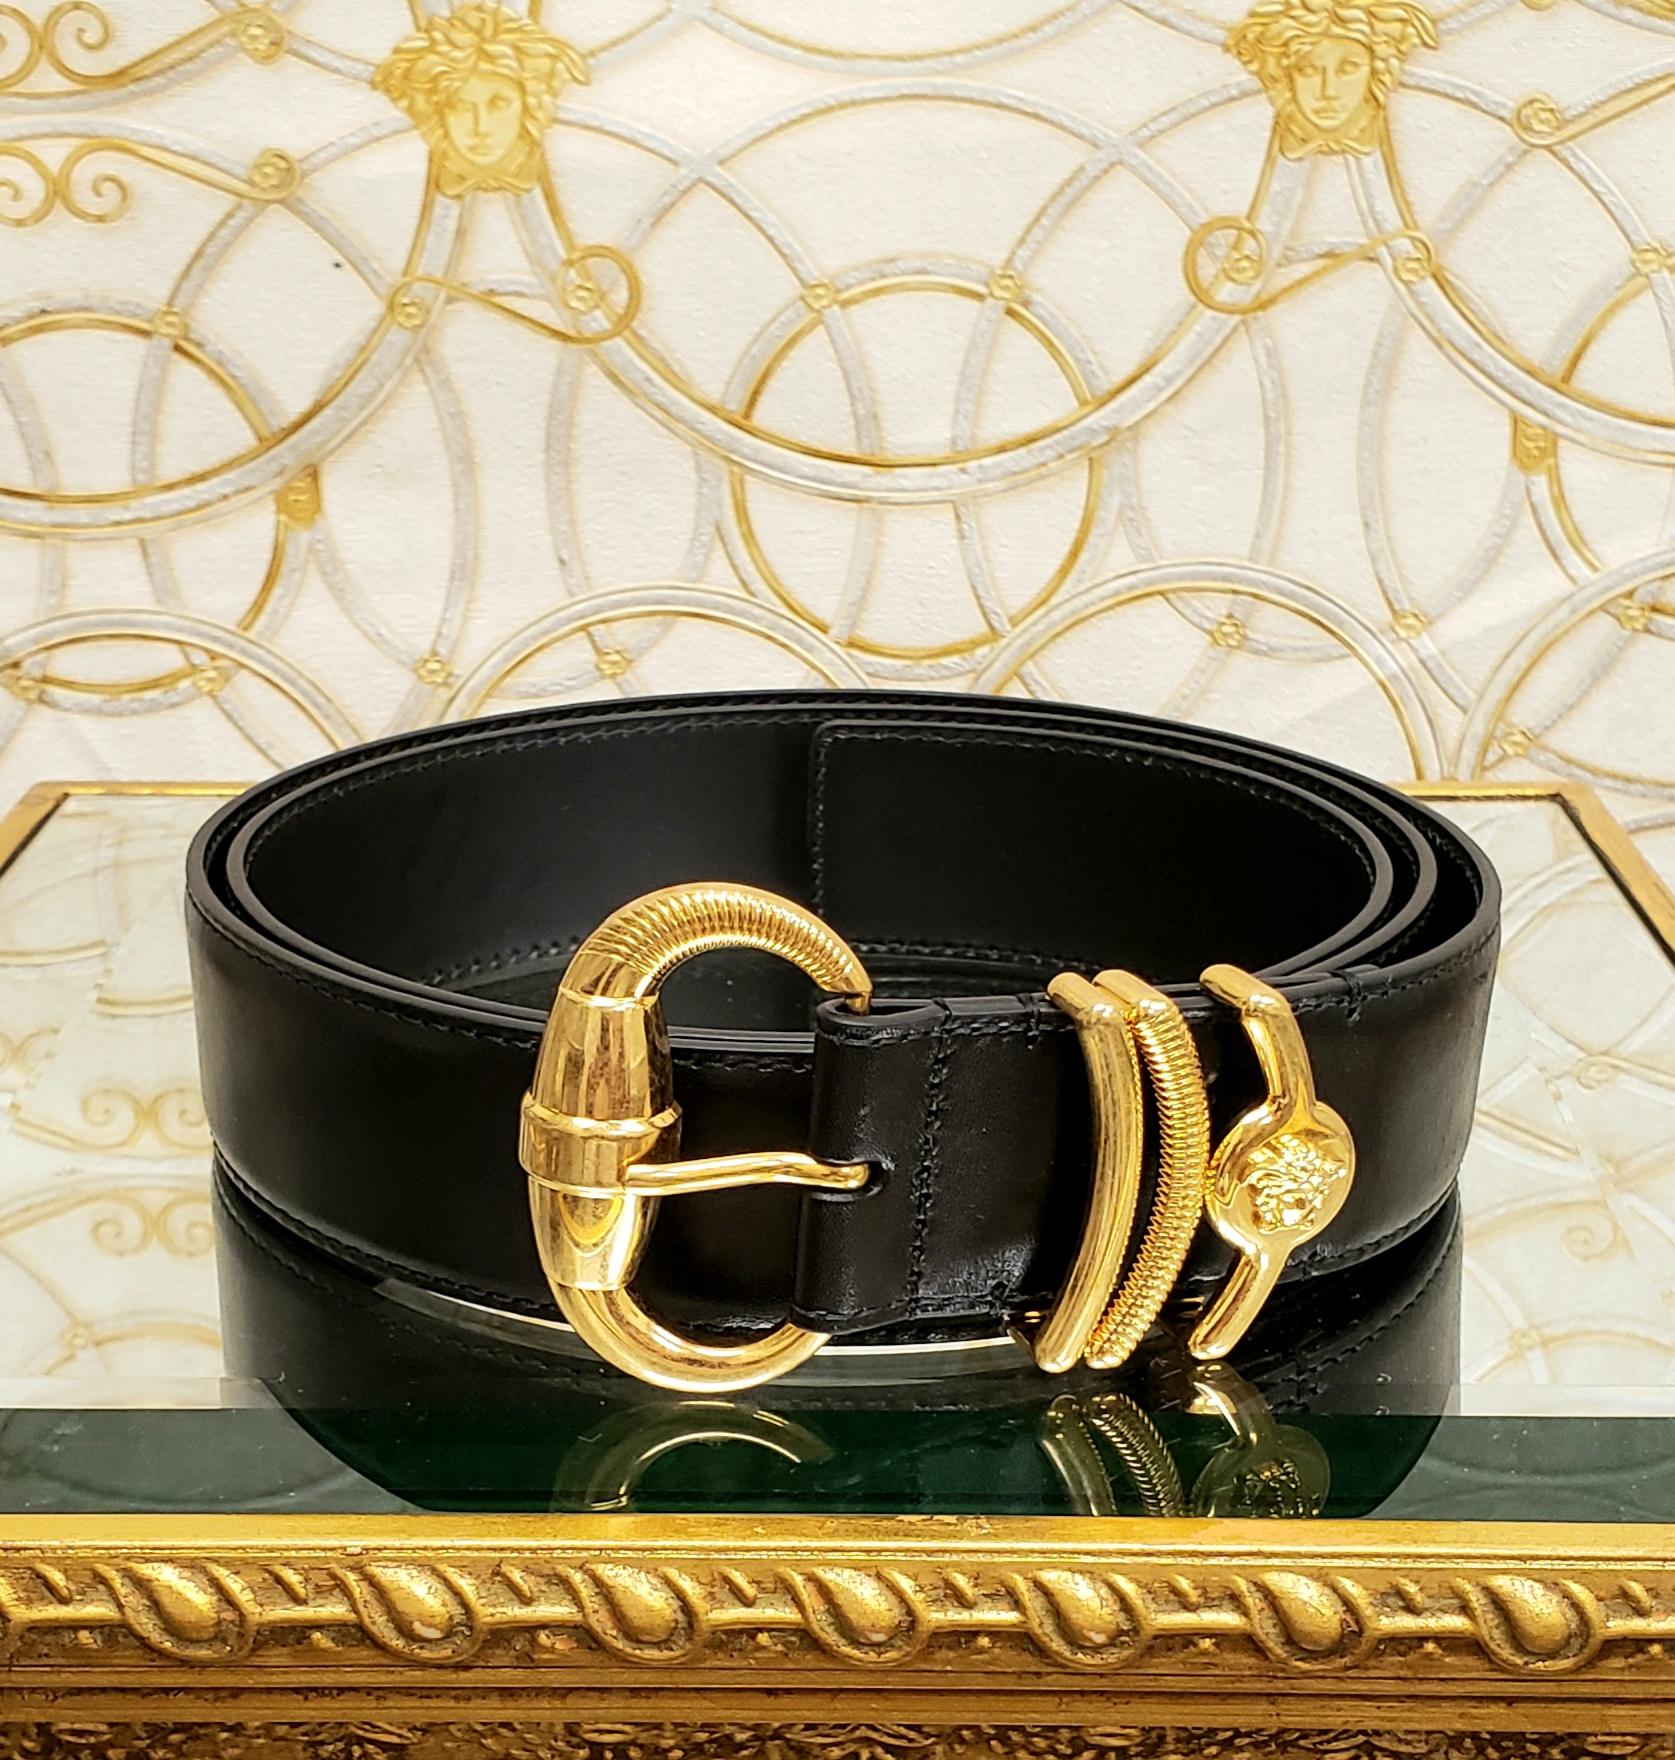 VERSACE

Men's black leather belt 
Gold-plated Buckle w/ Medusa

Made in Italy
   Size 115 / 46 
51